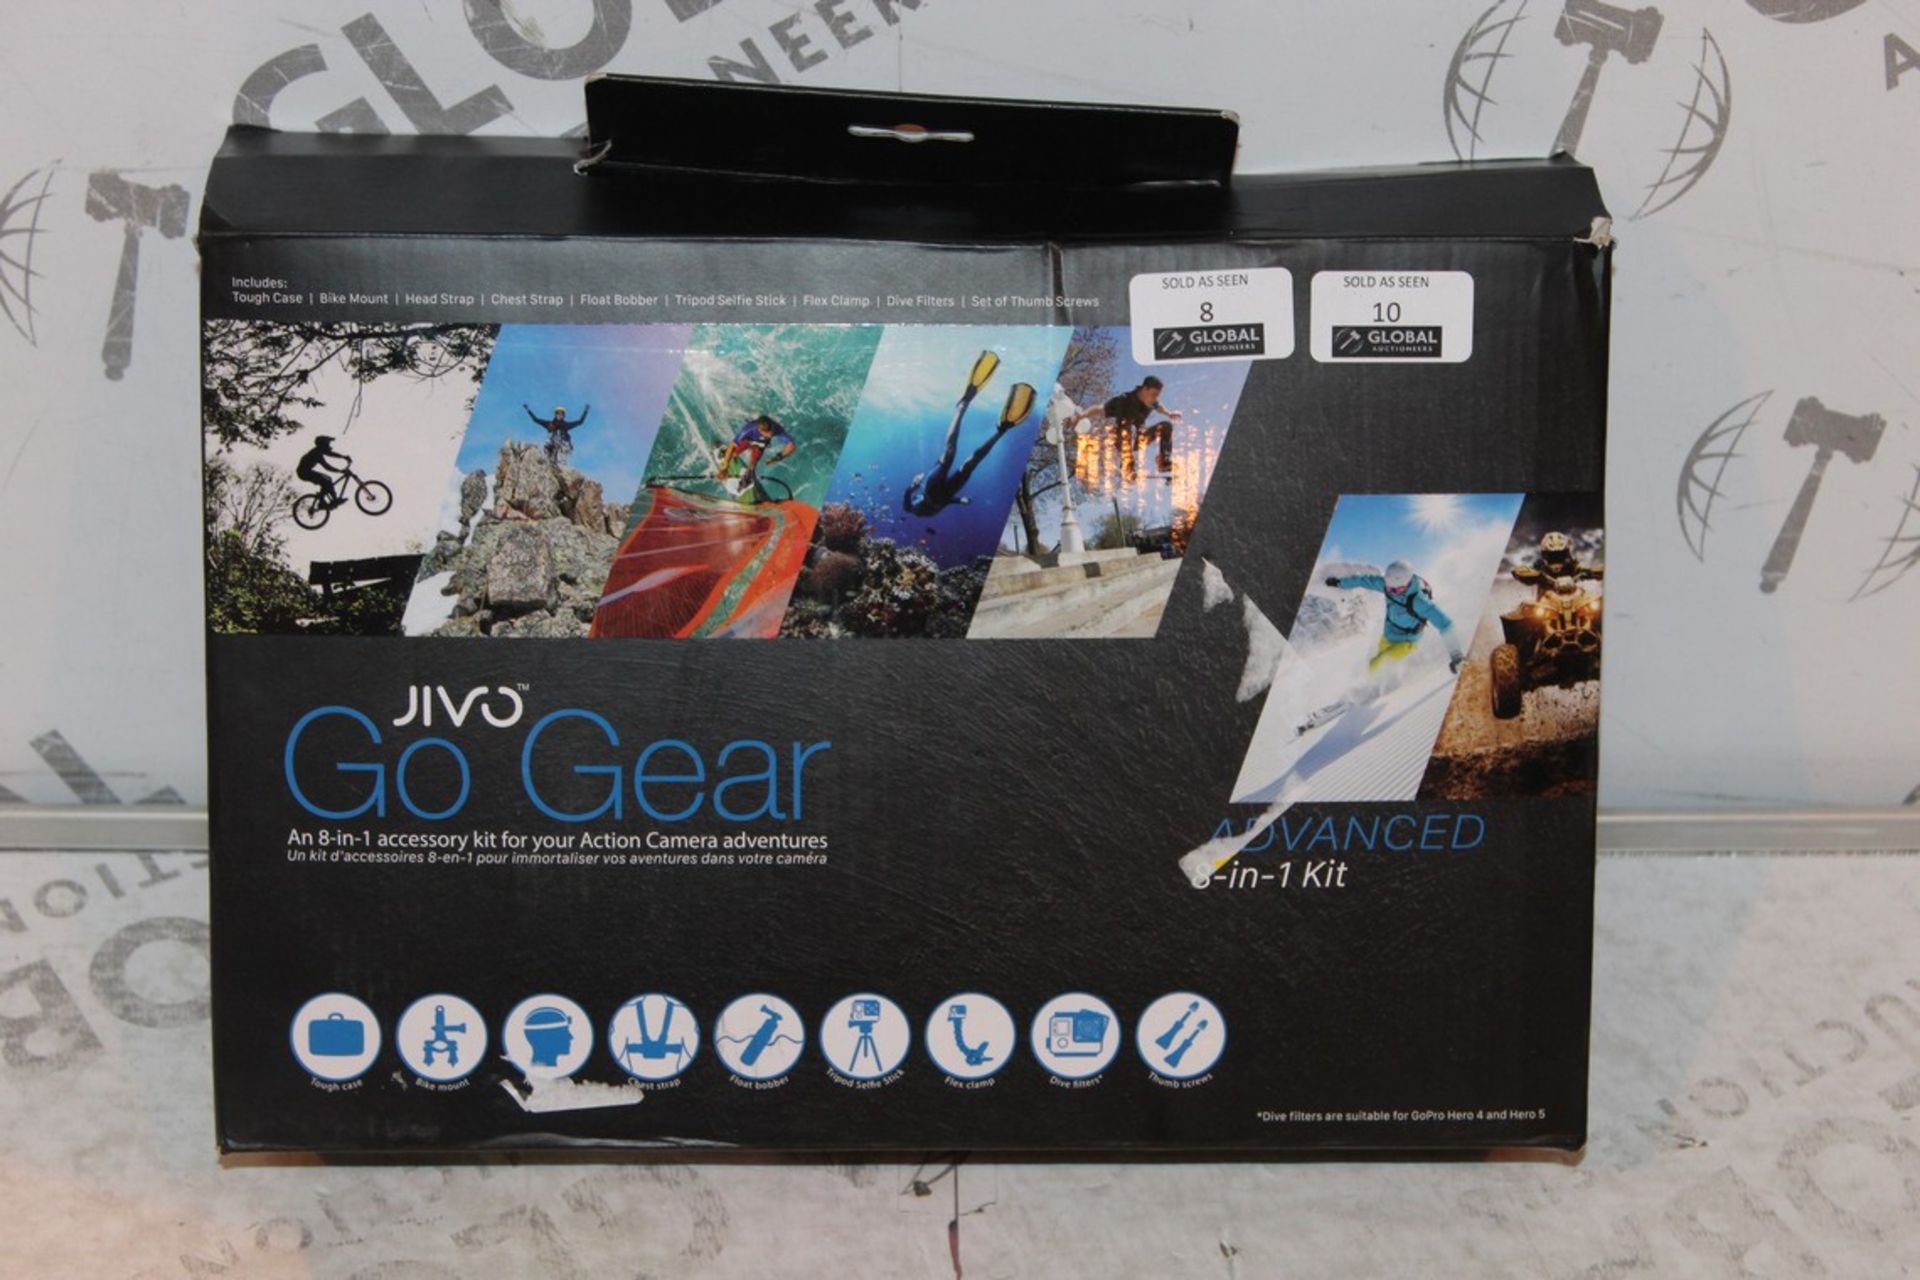 Boxed Jivo Go Gear 8 In 1 Advanced Action Camera Accessory Kit RRP £90